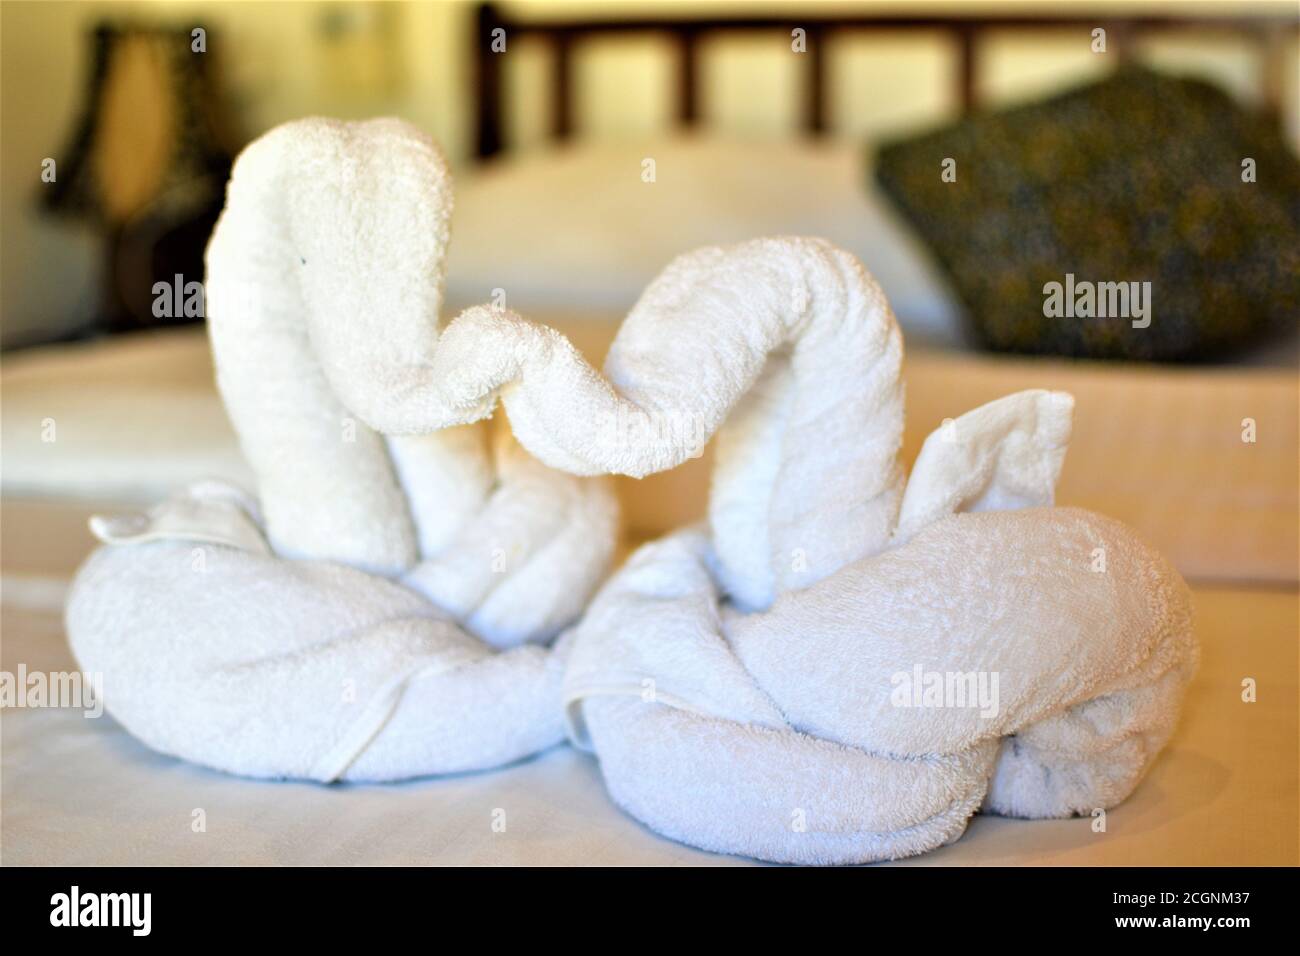 White towel swans are placed on a bed to welcome new guests to a hotel room Stock Photo